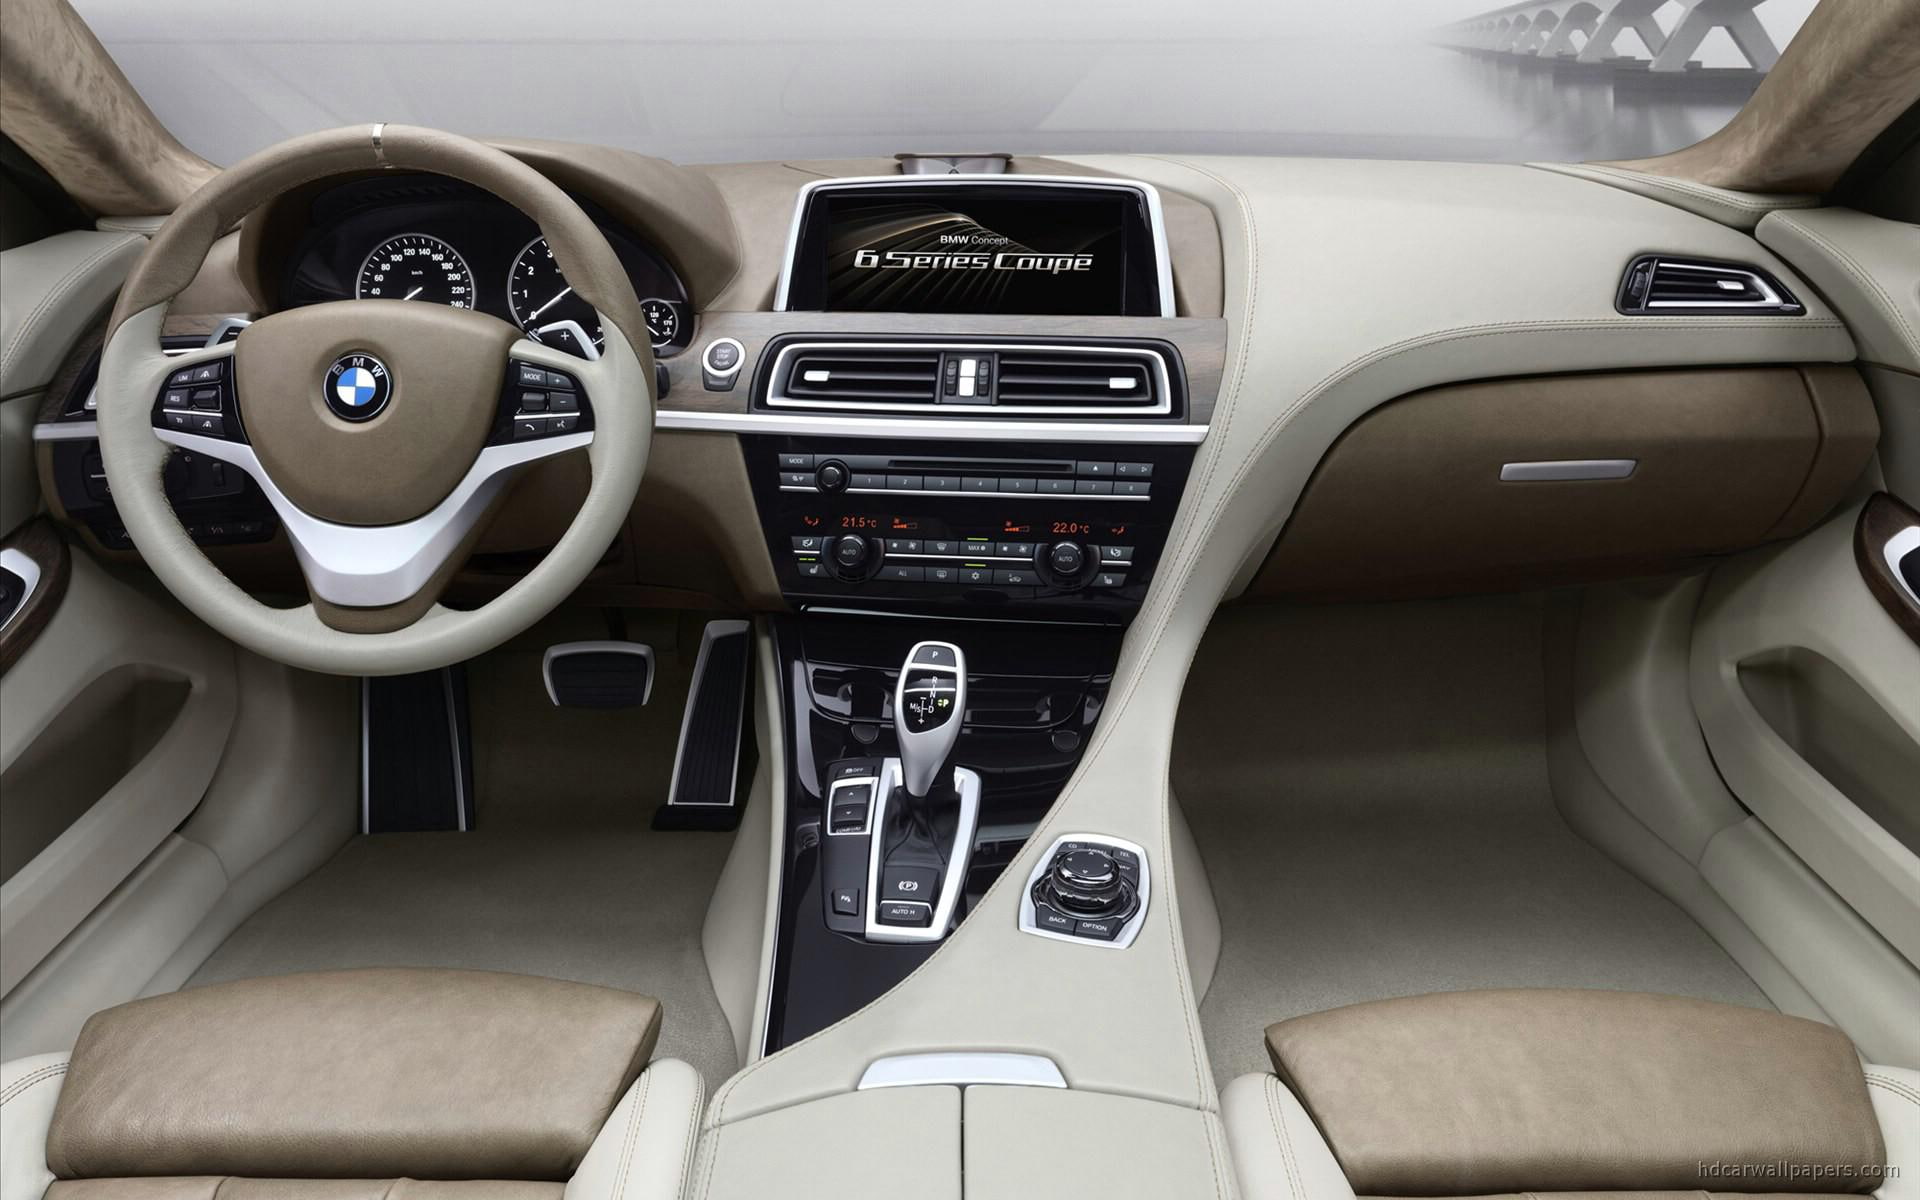 2010 BMW 6 Series Concept Interior, gray-and-white bmw dashboard